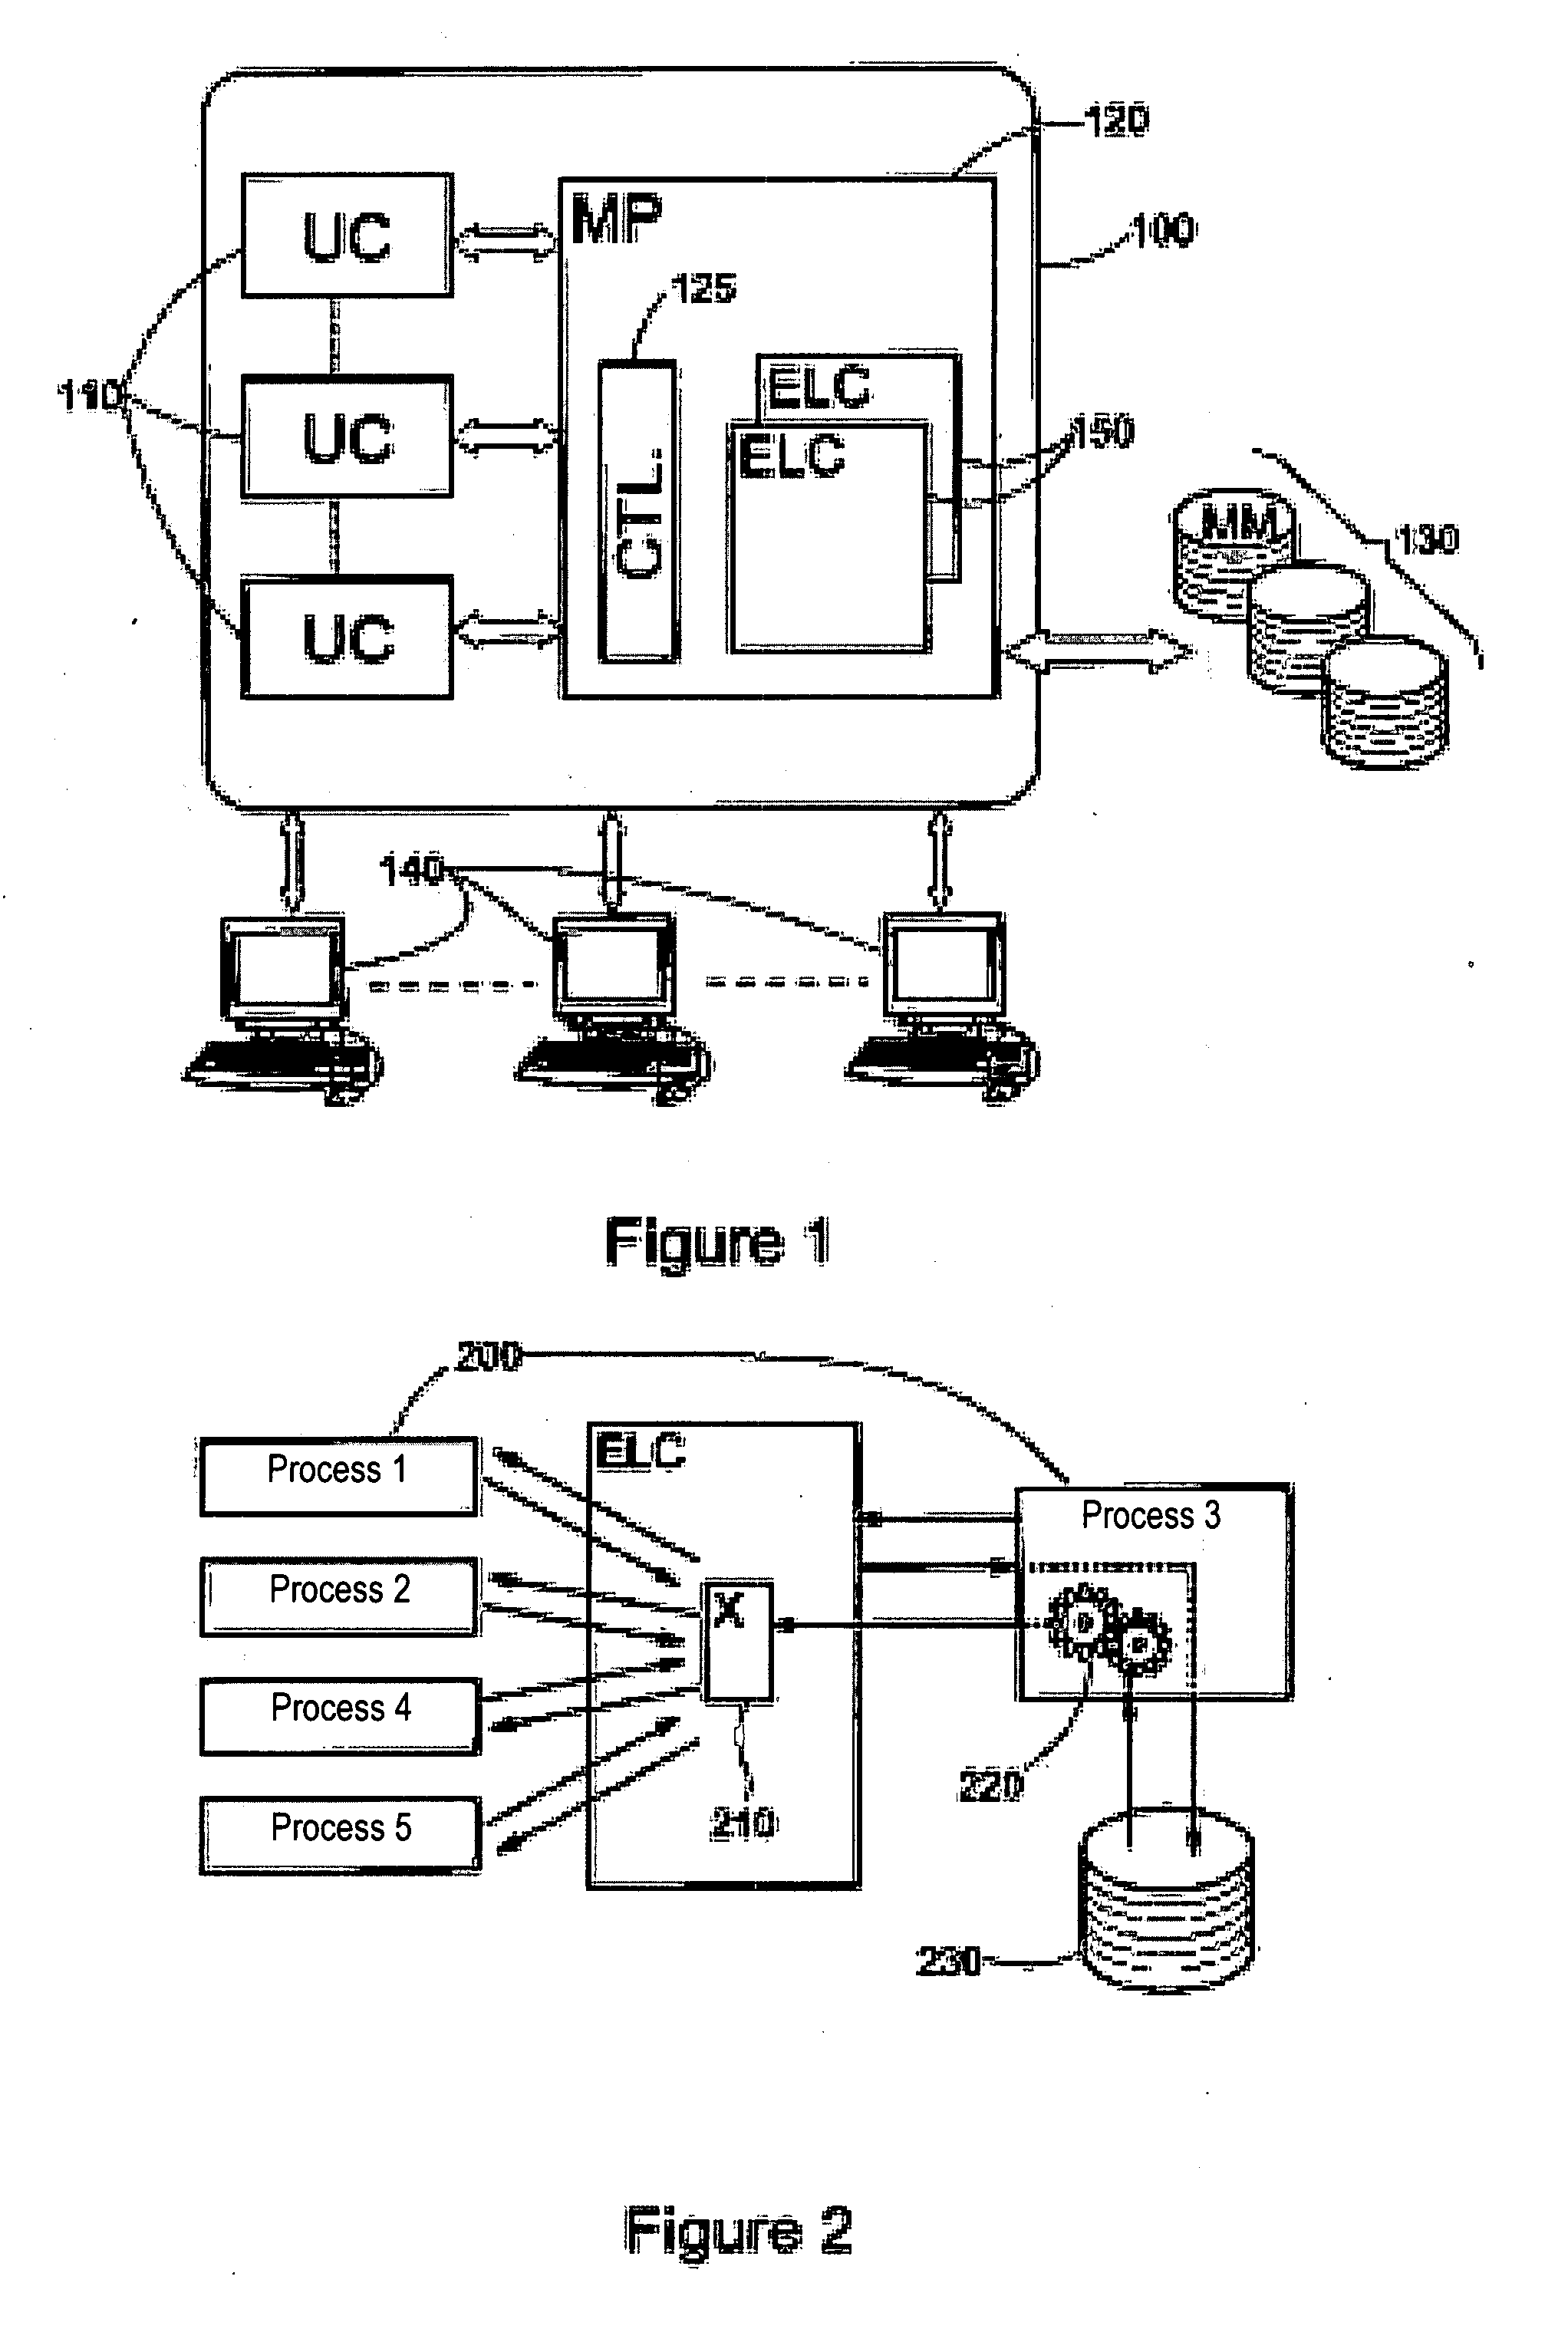 Method and System For Maintaining Consistency of a Cache Memory Accessible by Multiple Independent Processes